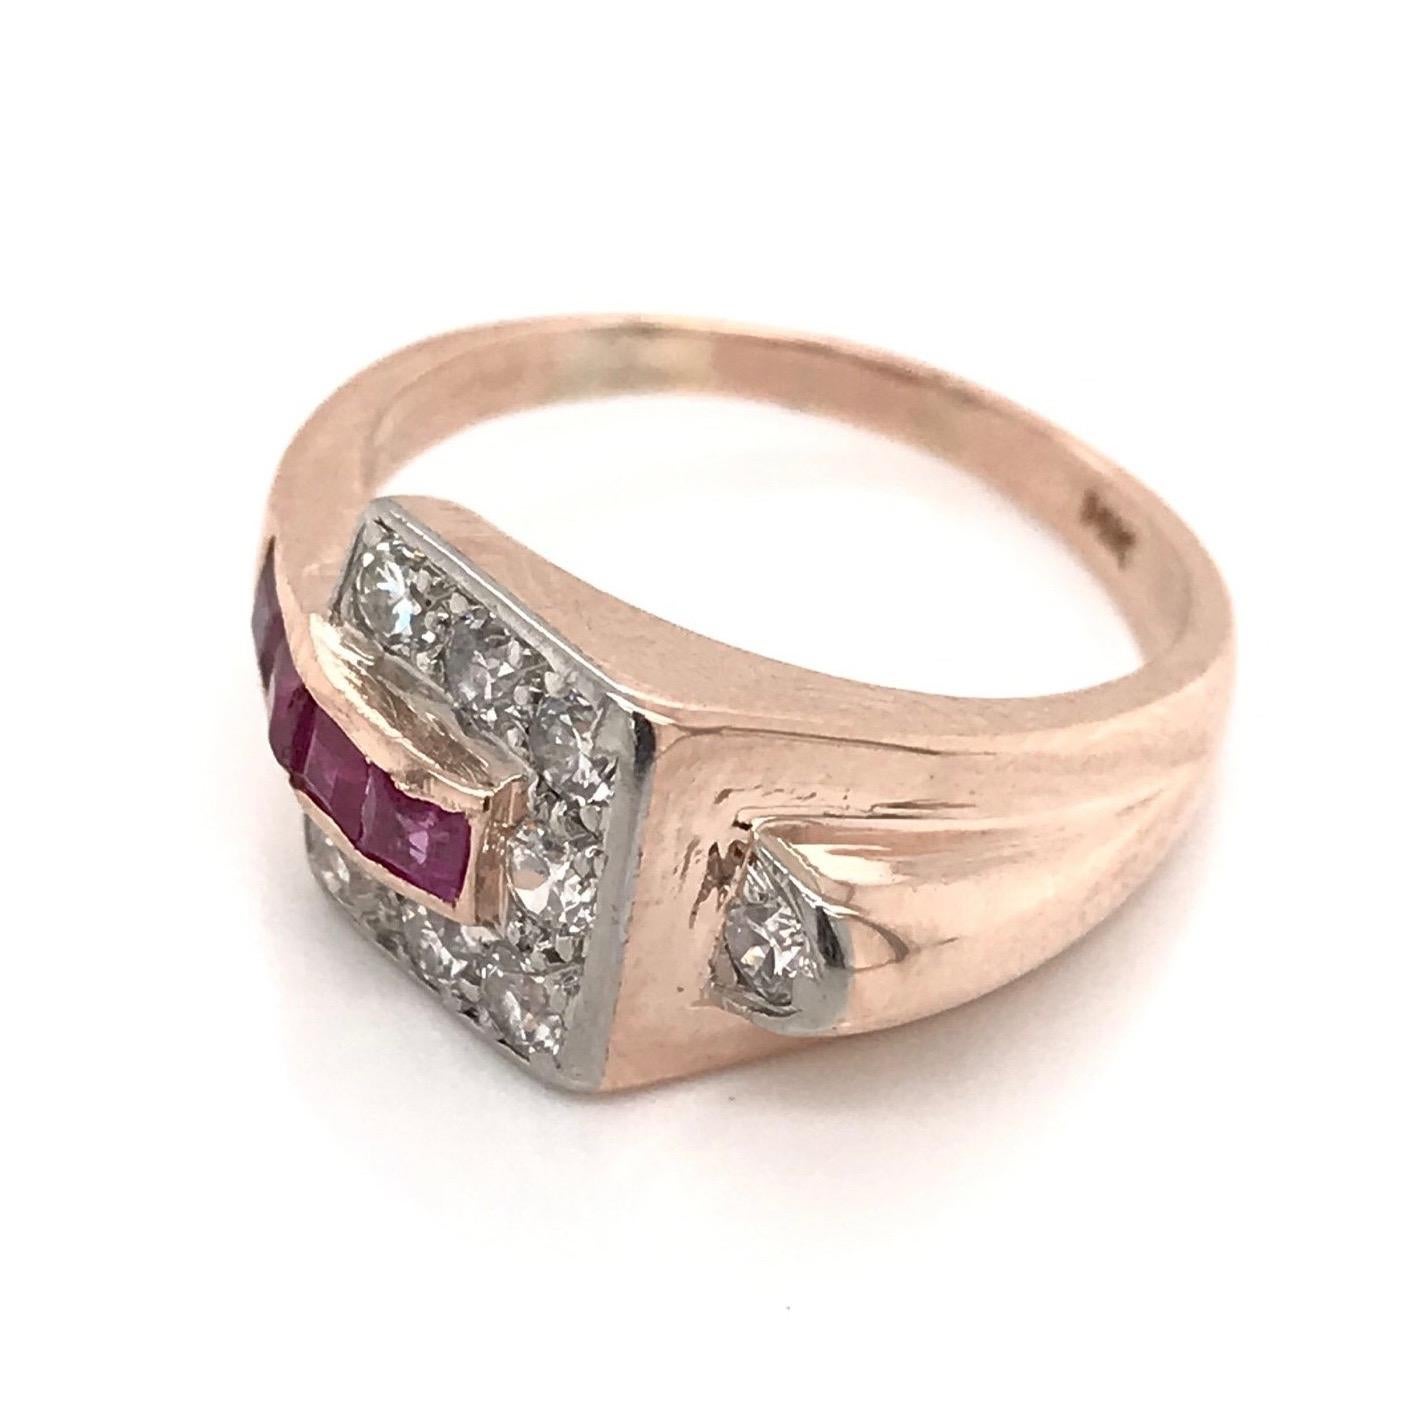 This extravagant Retro piece was crafted sometime during the Mid Century design period ( 1940-1960's ). The setting is 14k rose gold and features four richly hued french cut rubies, eight sparkling diamond accents, and subtle white gold accents.